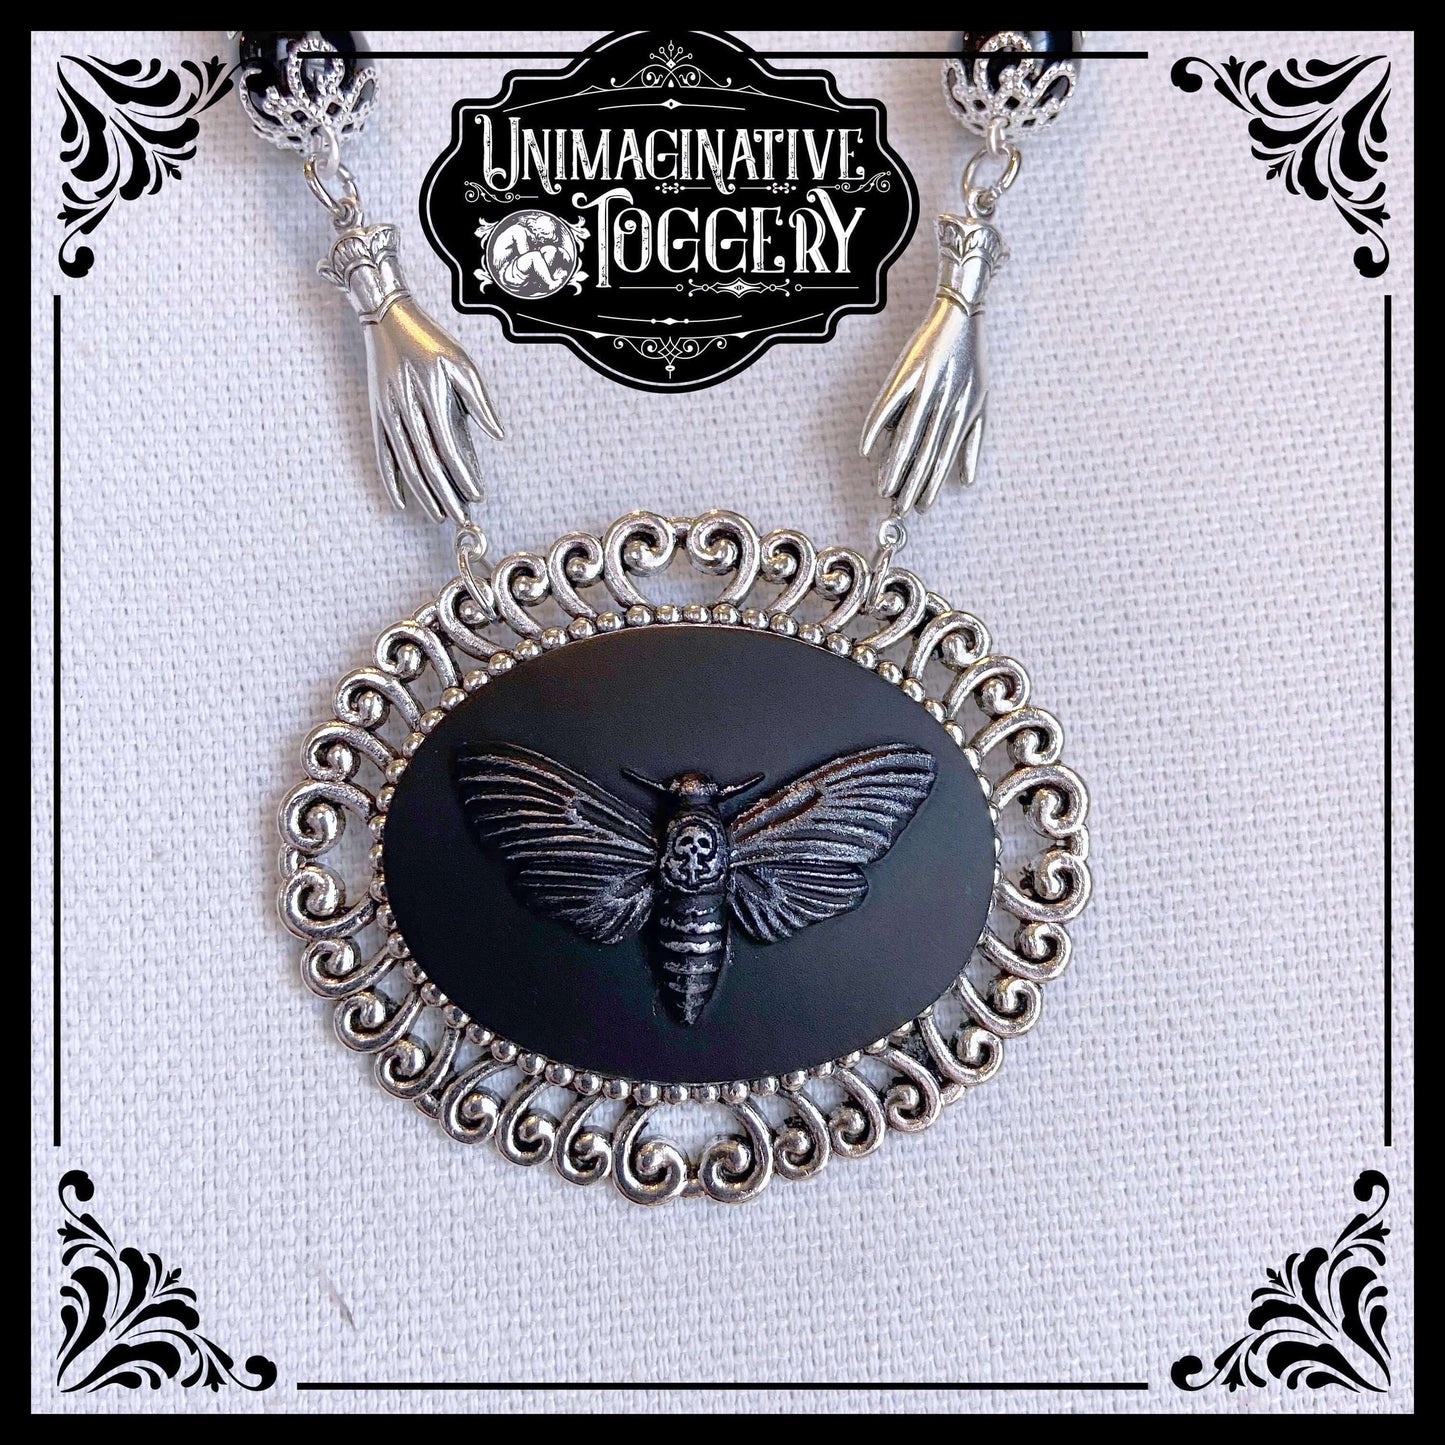 Black and silver beaded necklace deaths head moth cameo pendant hands - Unimaginative By Charli Siebert